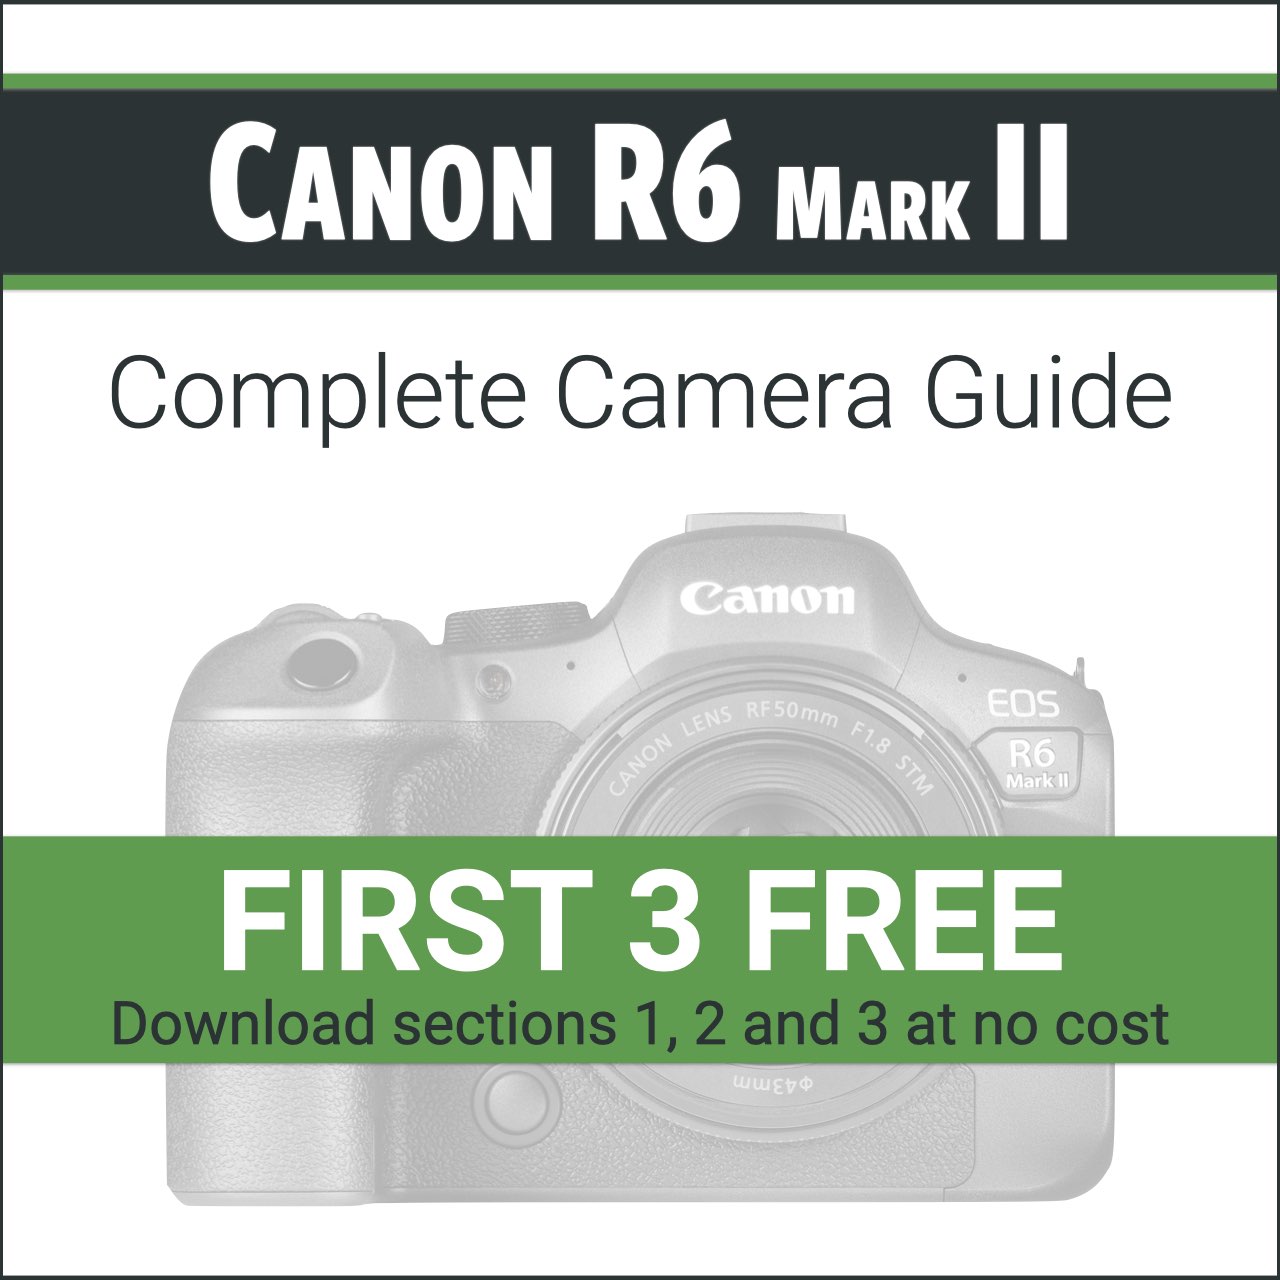 Canon Rebel: A Guide to the Popular Beginner Camera Line